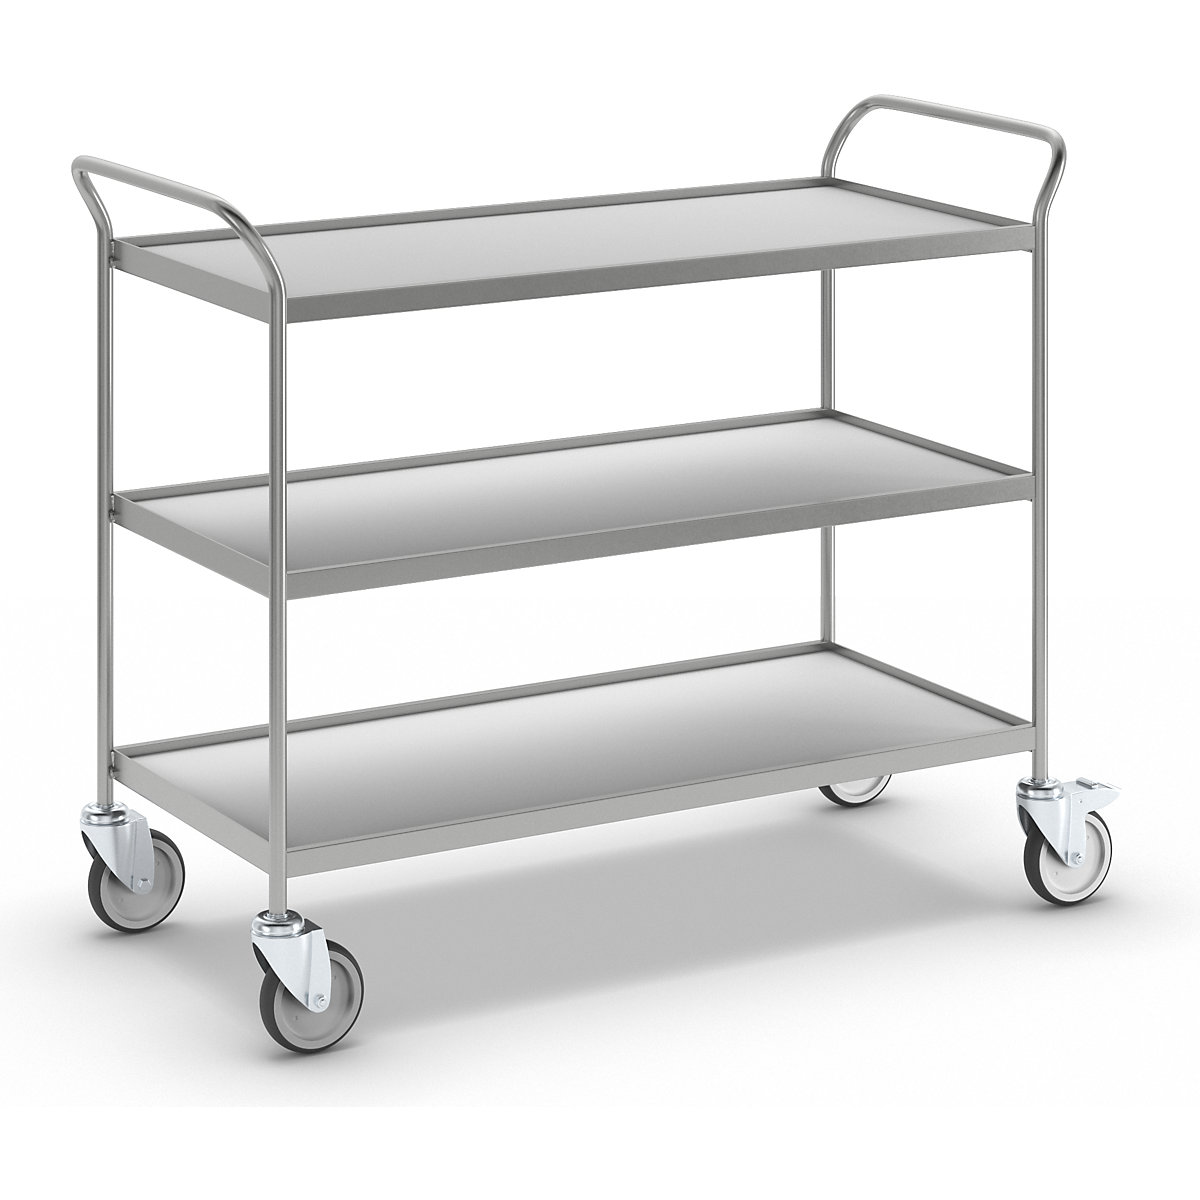 Serving trolley – eurokraft pro, 3 shelves in grey, with 4 swivel castors, 2 with double stops-1